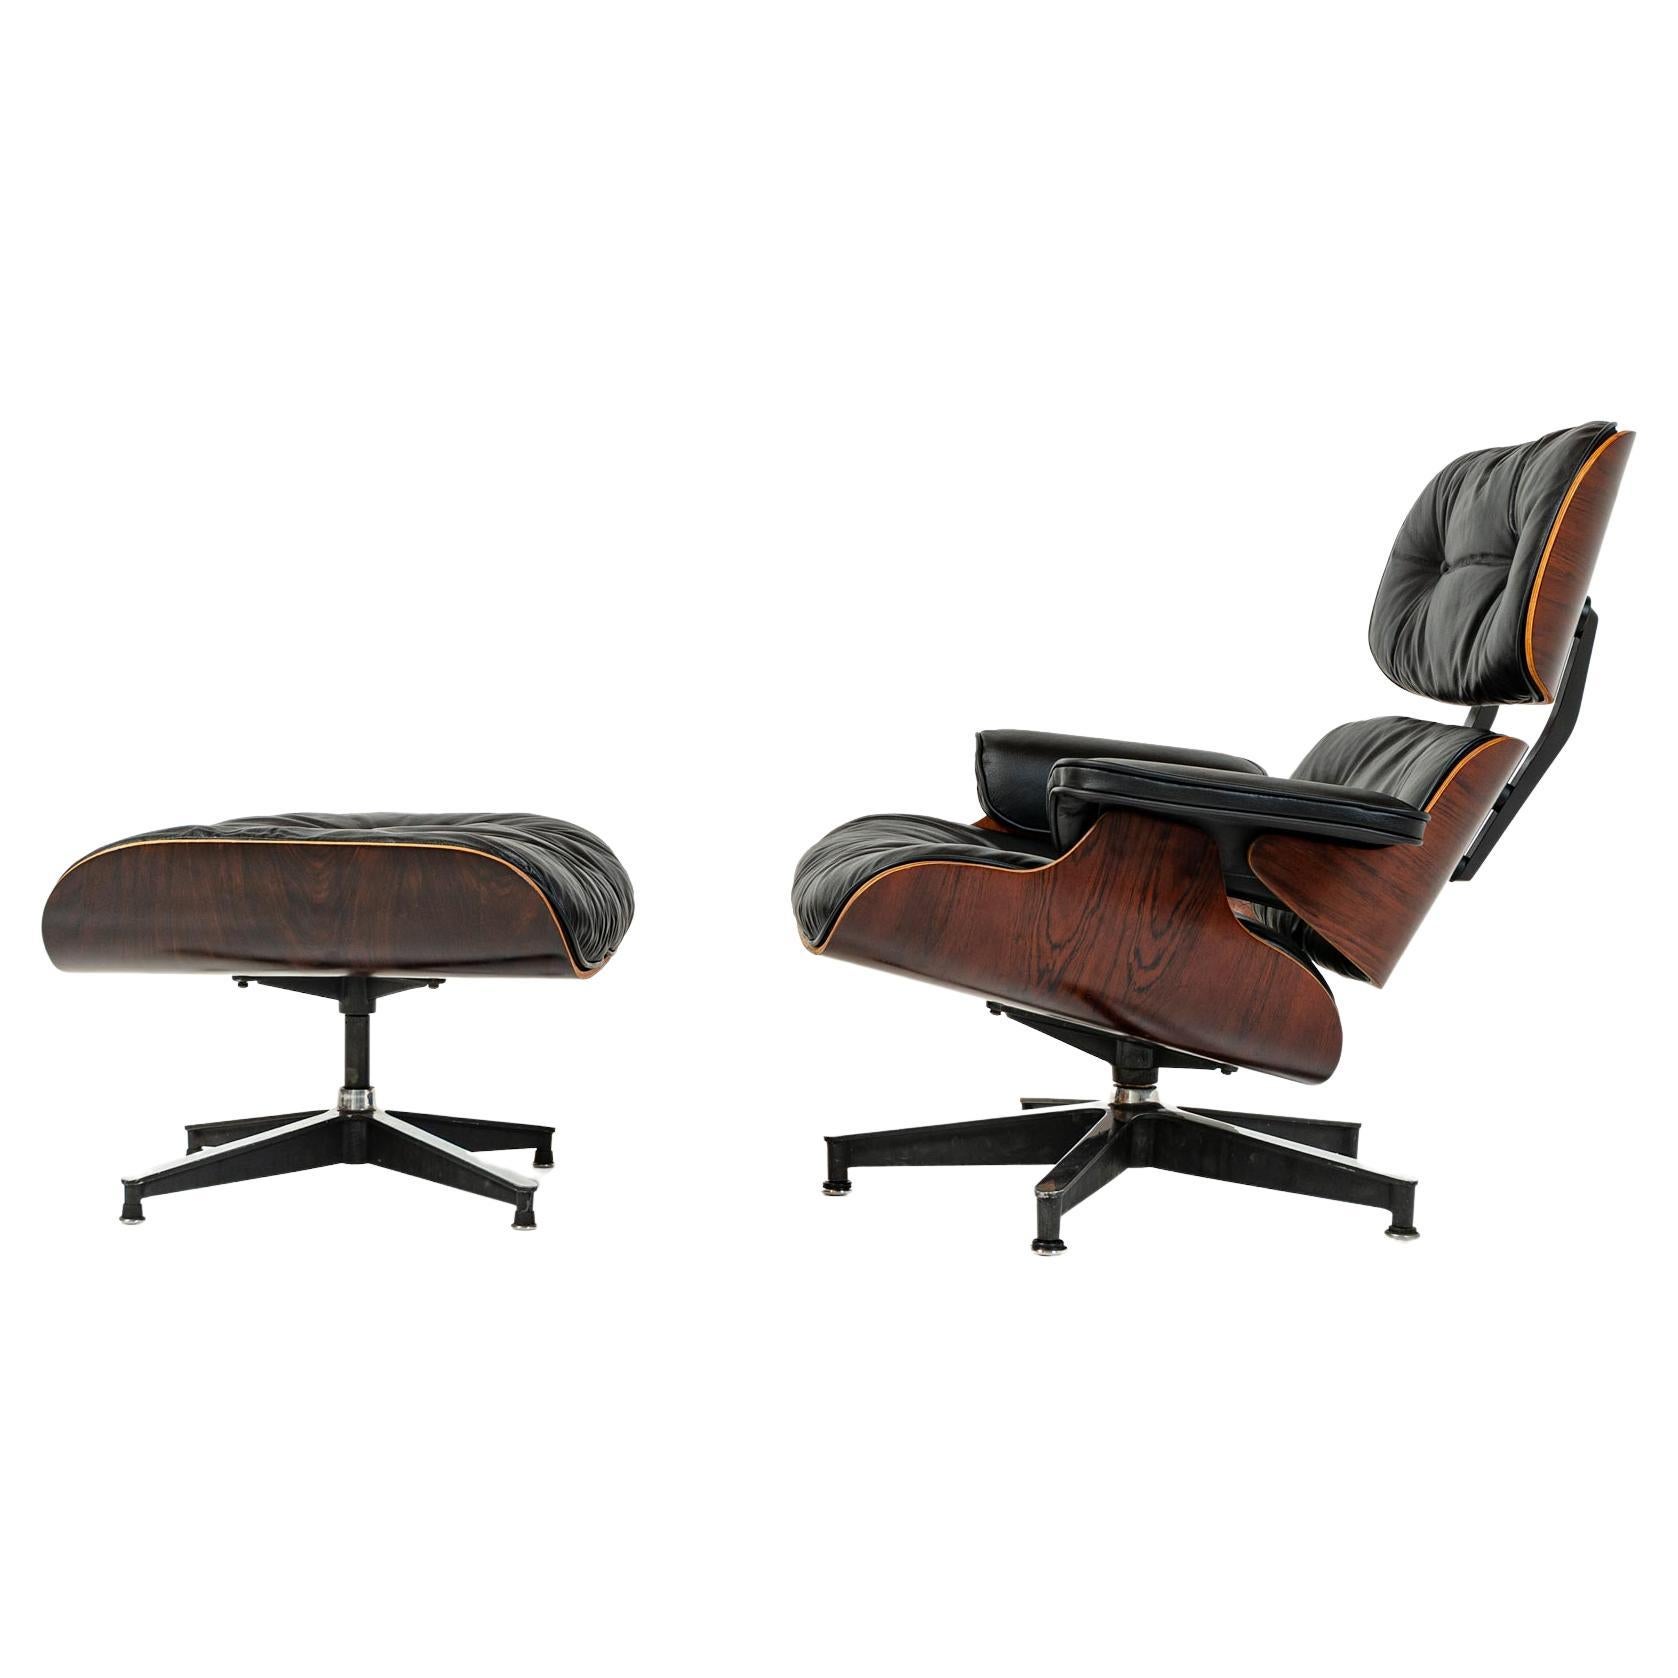 Very First Generation 1956 Eames Lounge Chair 670 and Spinning Ottoman 671 For Sale